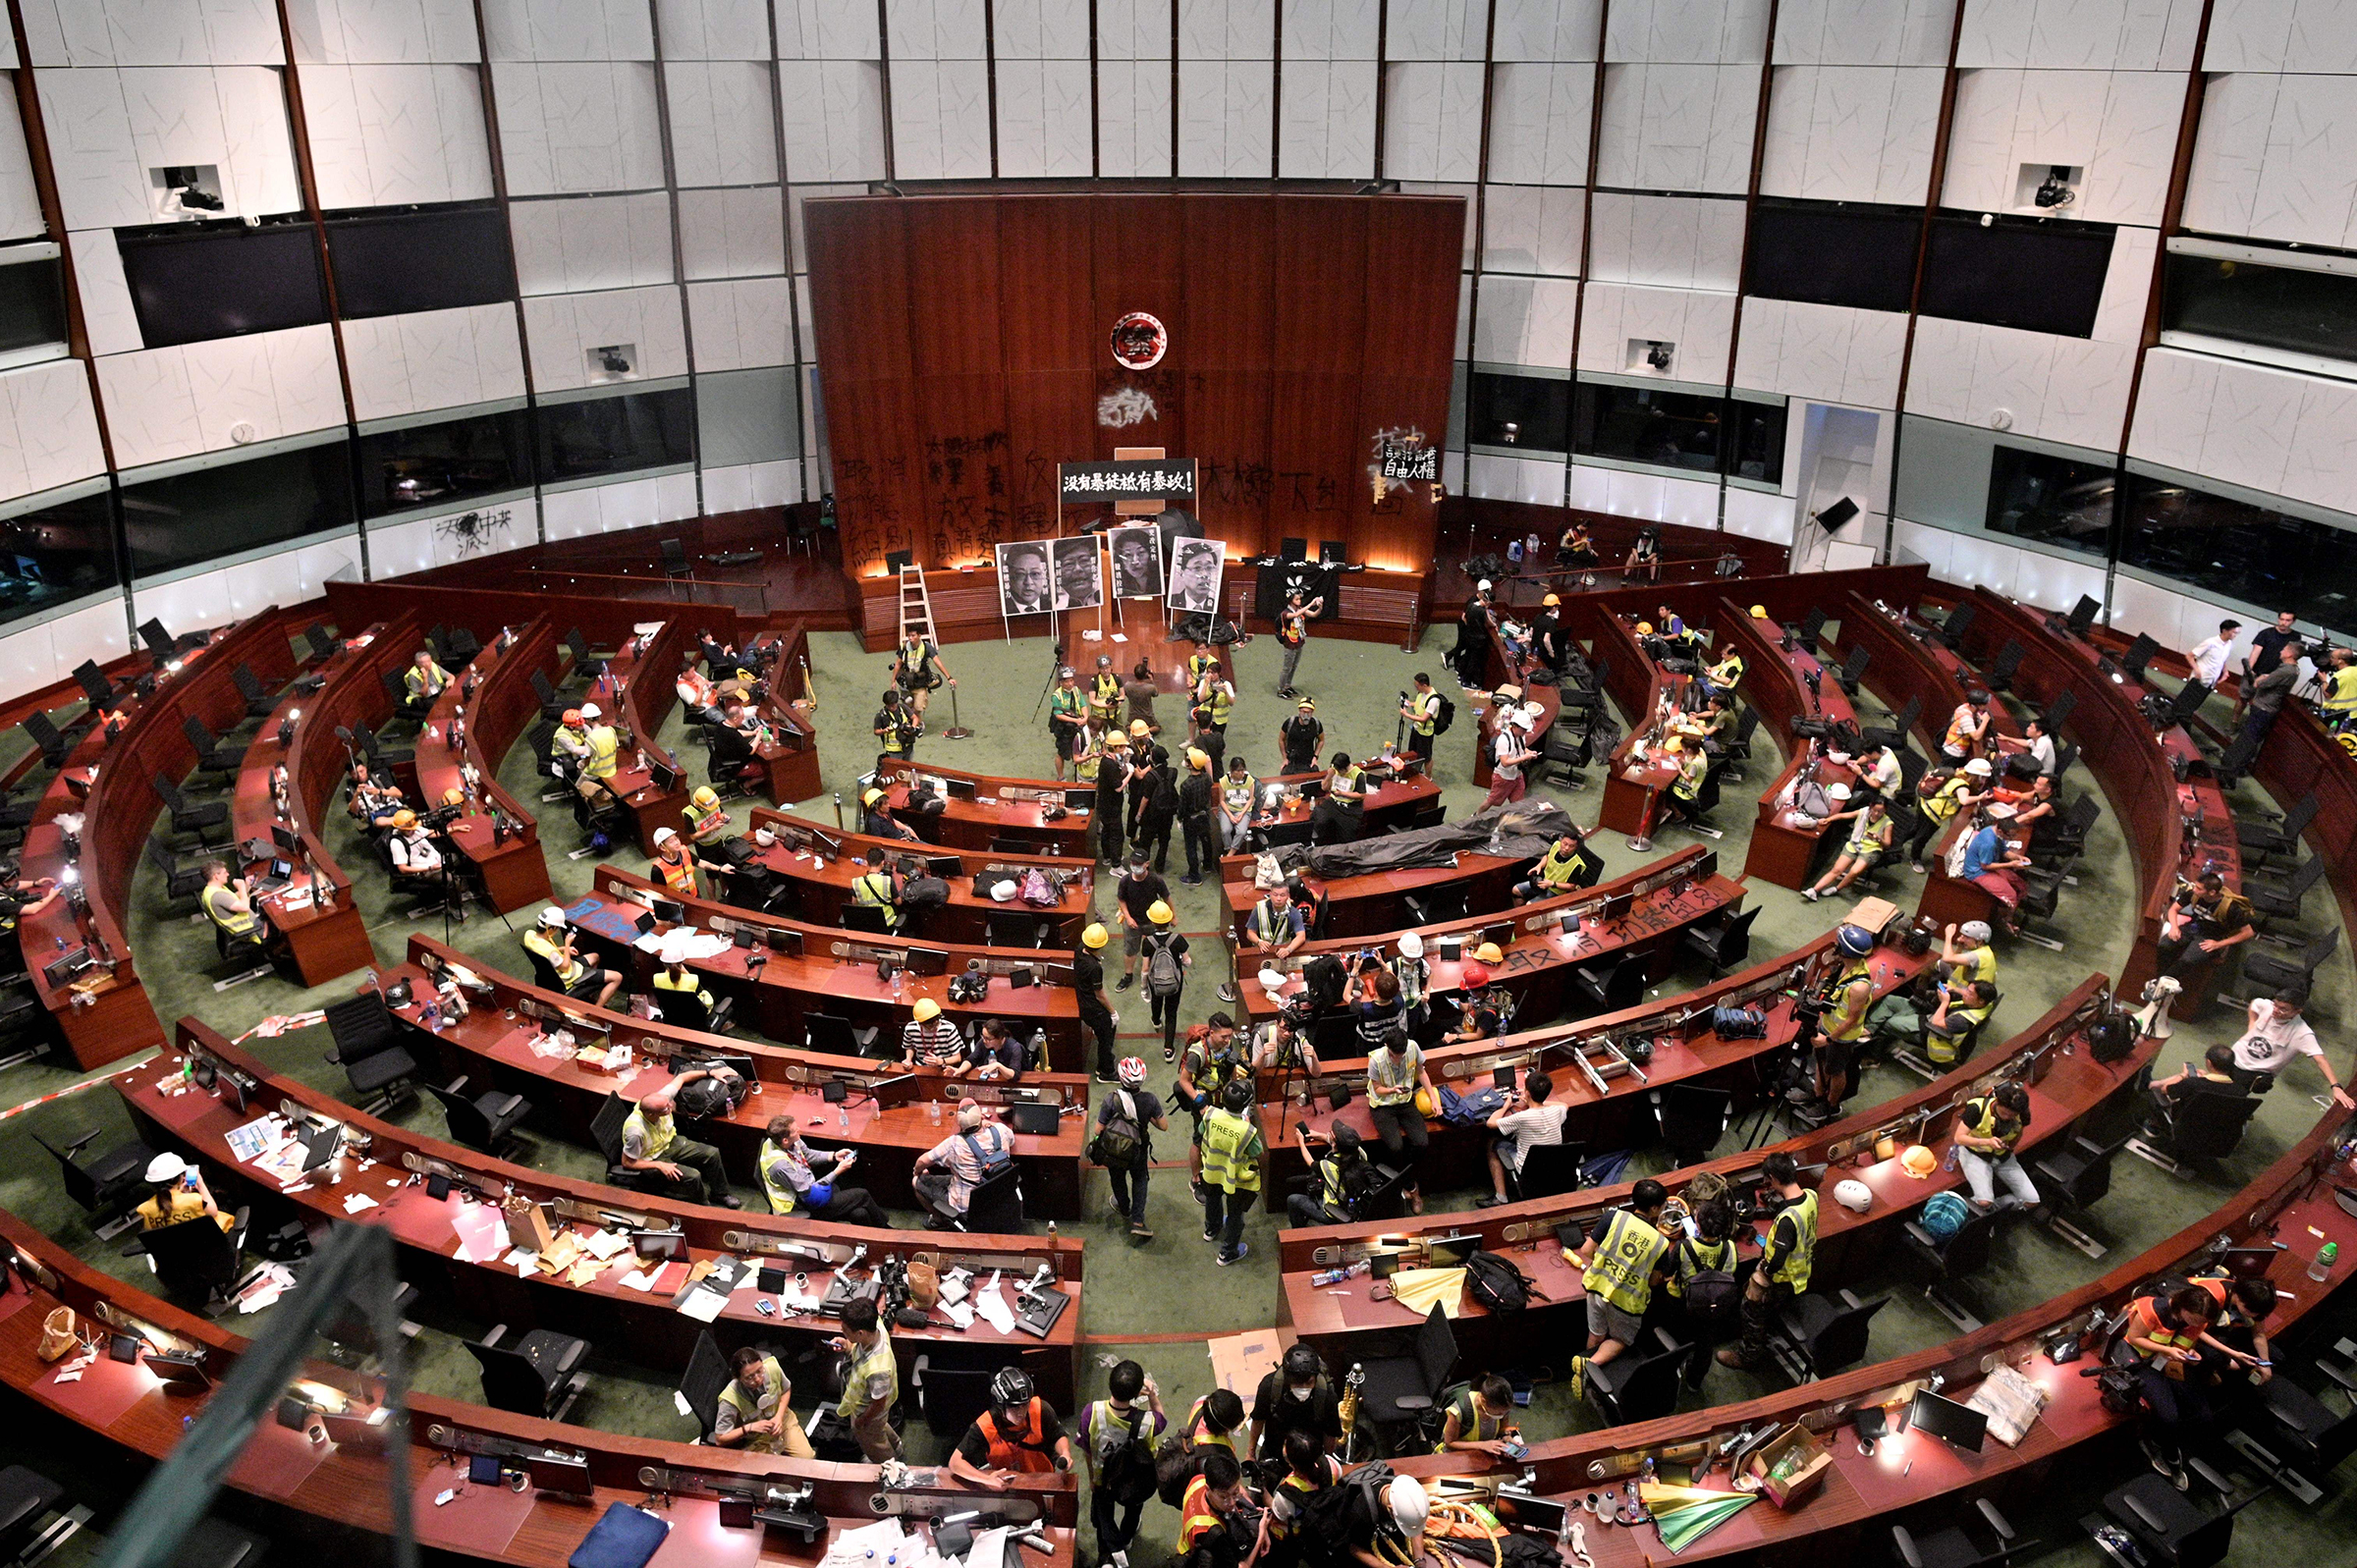 Protesters and members of the media are seen in the chambers after demonstrators broke into the government headquarters in Hong Kong on July 1, 2019. (Anthony Wallace—AFP/Getty Images)